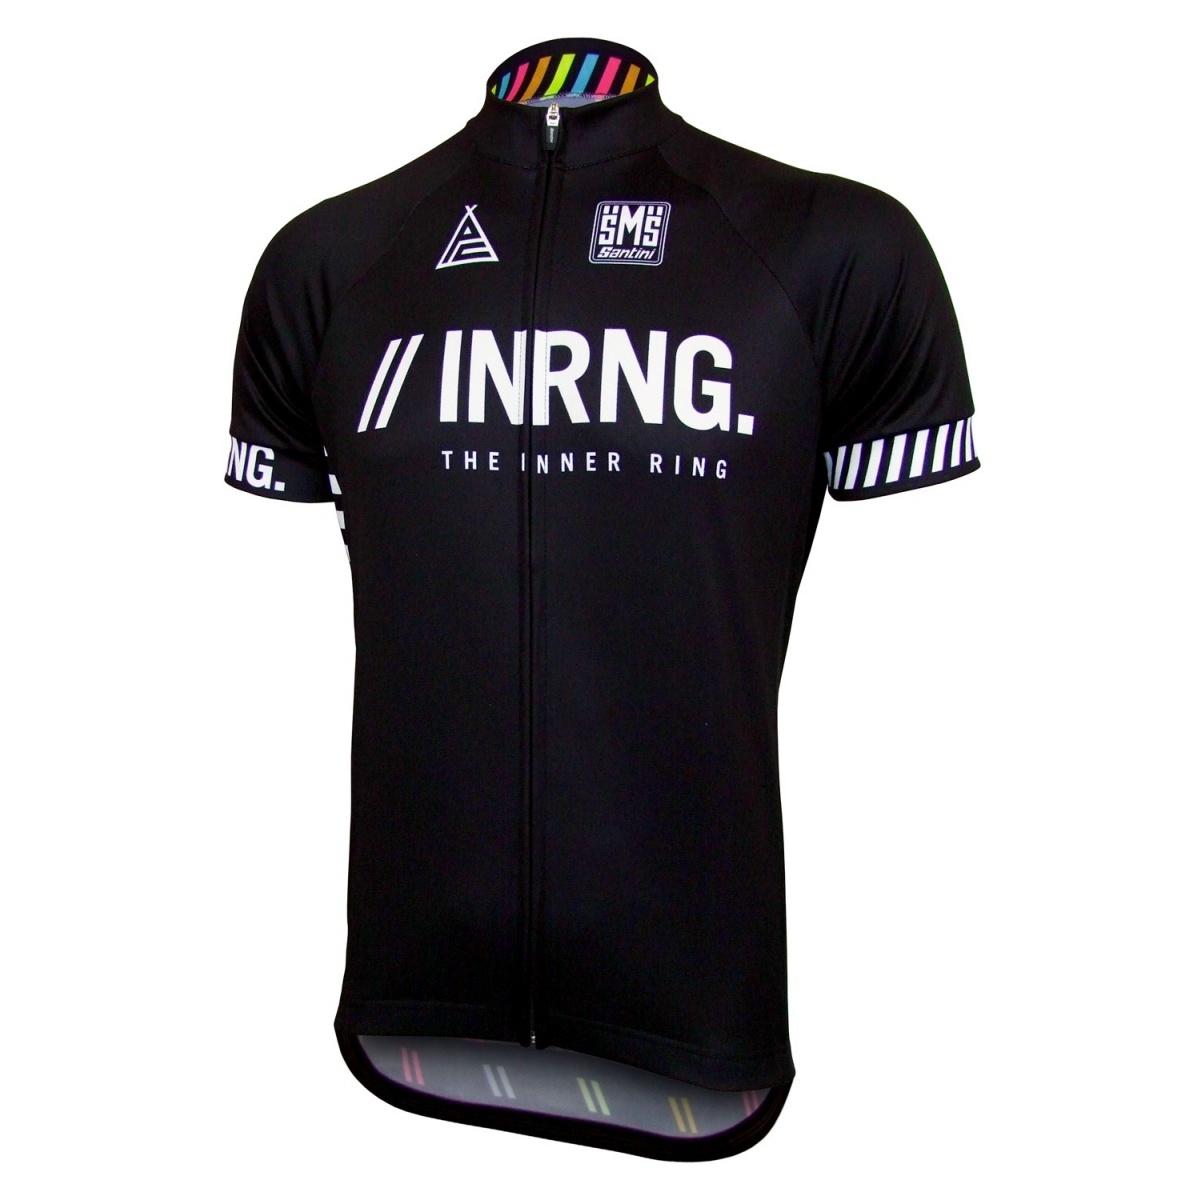 INRNG jersey